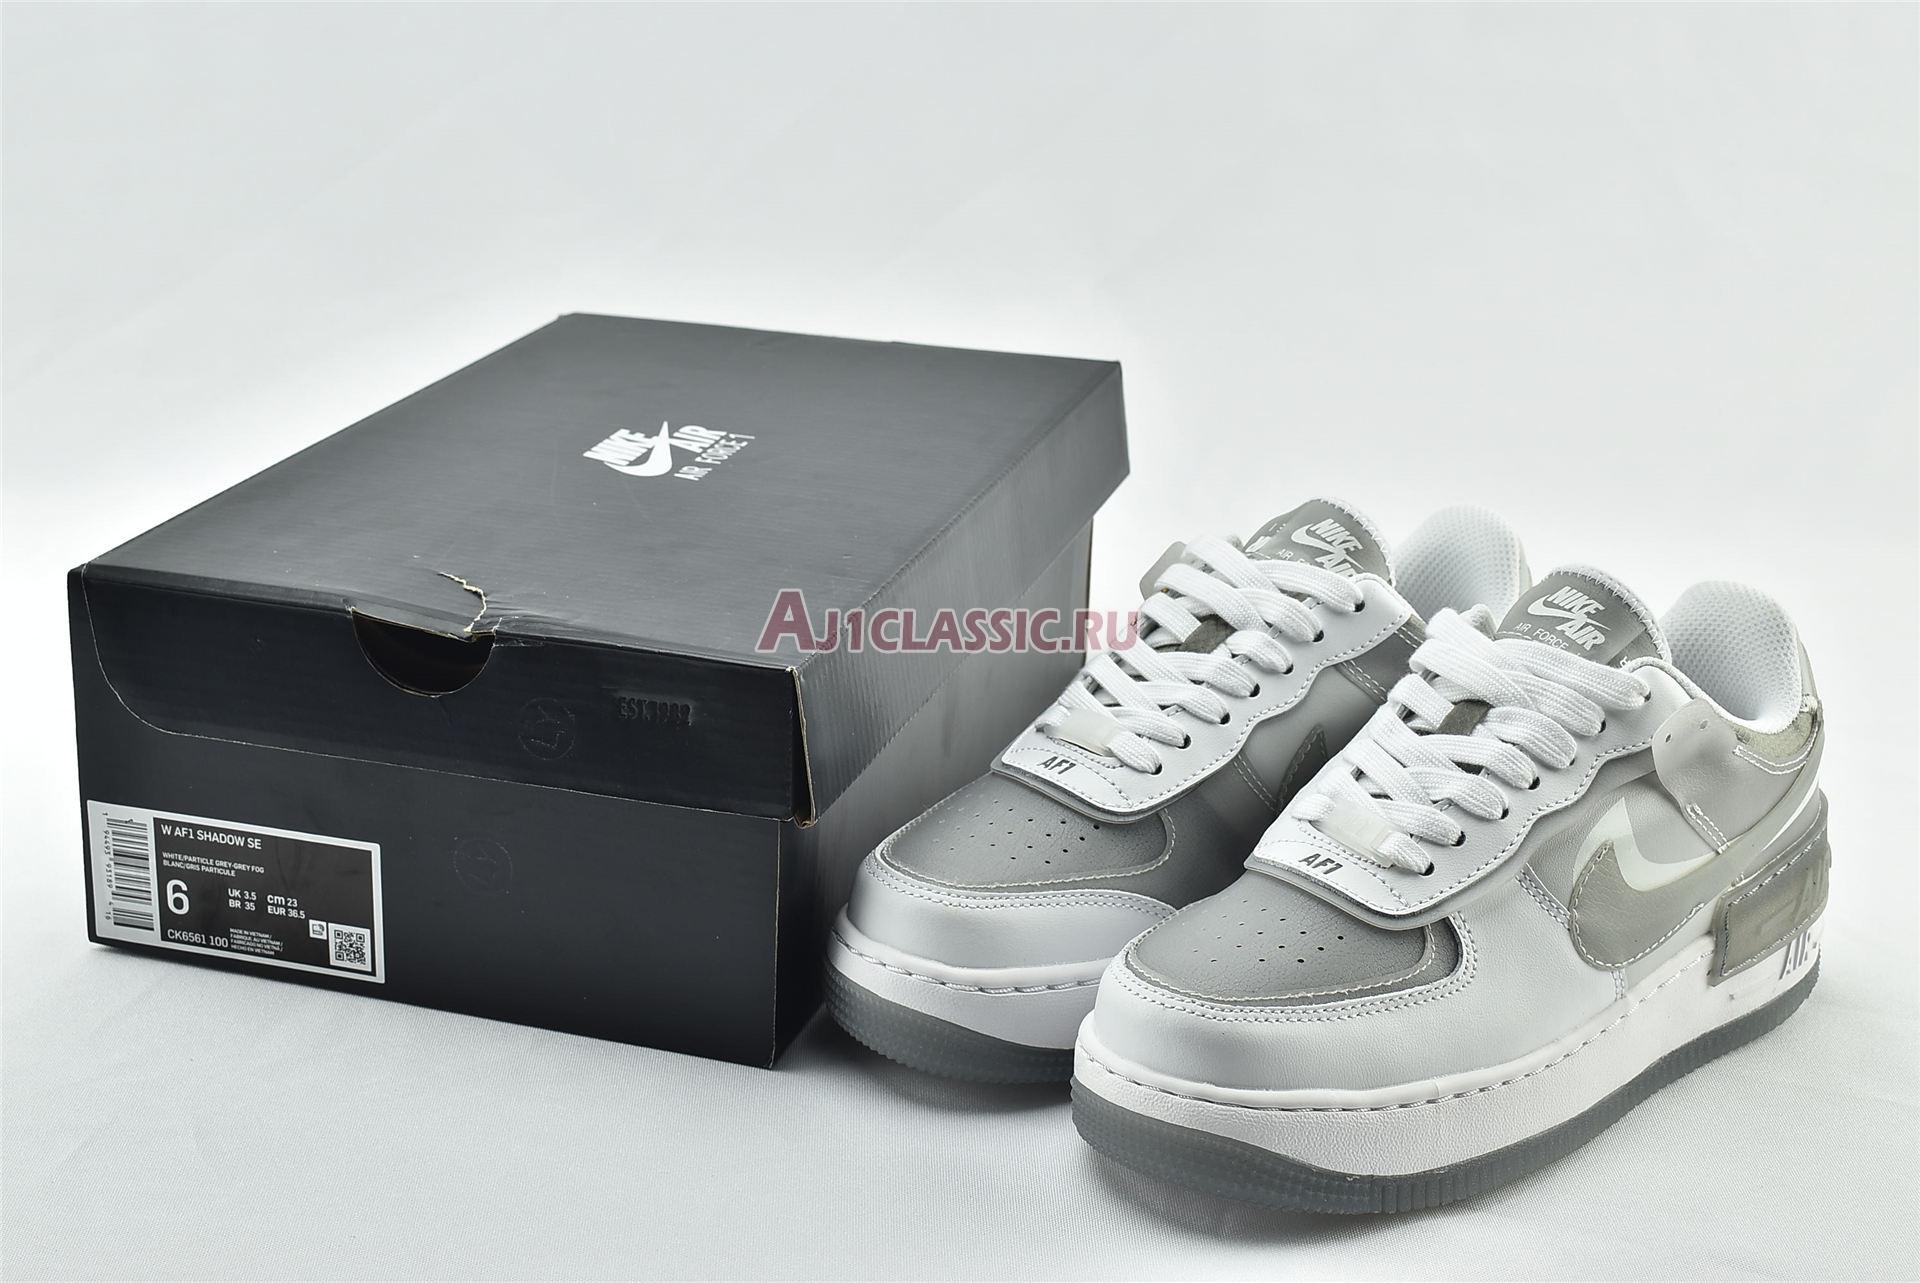 Nike Wmns Air Force 1 Shadow SE Particle Grey CK6561-100 White/Particle Grey-Grey Fog-Photon Dust Sneakers